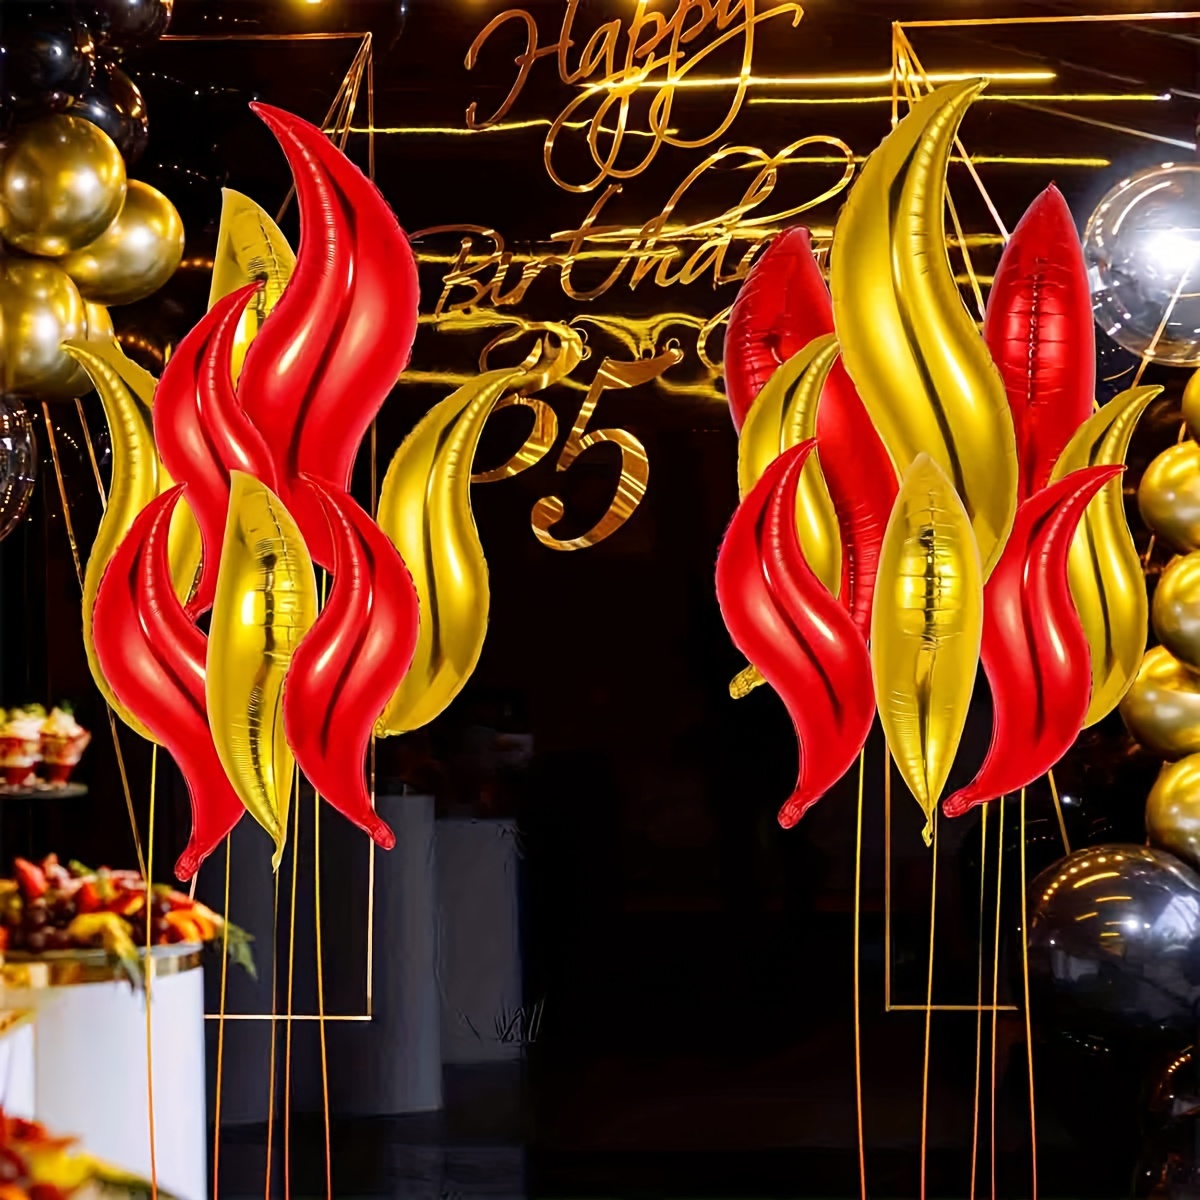 

20pcs Golden Red Flame-shaped Foil Balloons, Firefighter Theme Party Decor, Birthday Party Decoration, Carnival Decor, Holiday Decor, Home Room Decor